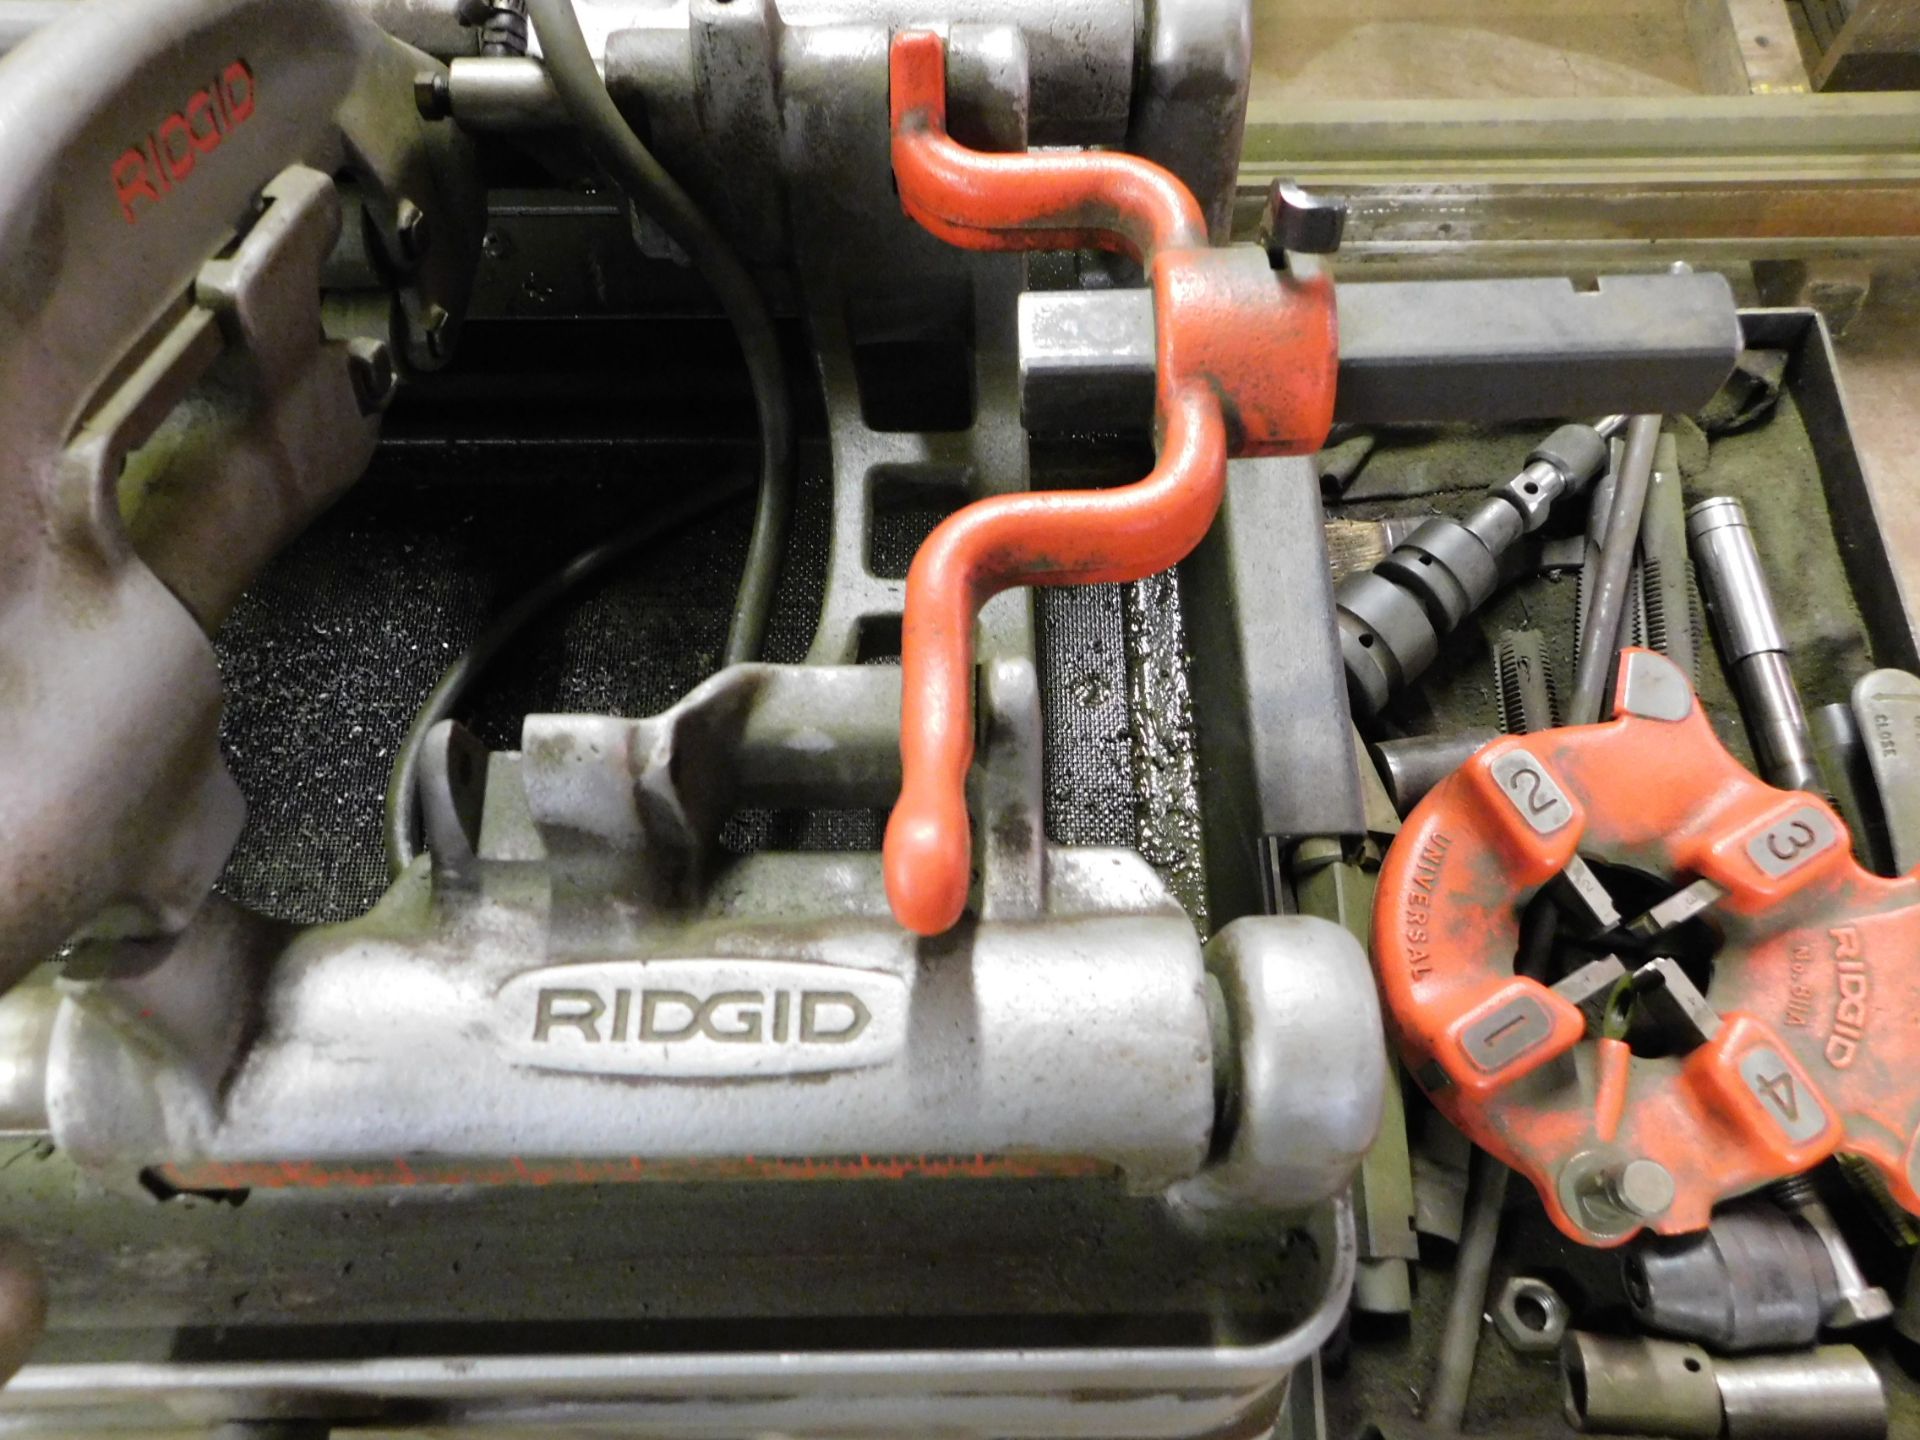 Ridgid Model 535 Pipe Threader, s/n EBE13544-0810, with Model 811A Die, Foot Pedal Controls - Image 6 of 8